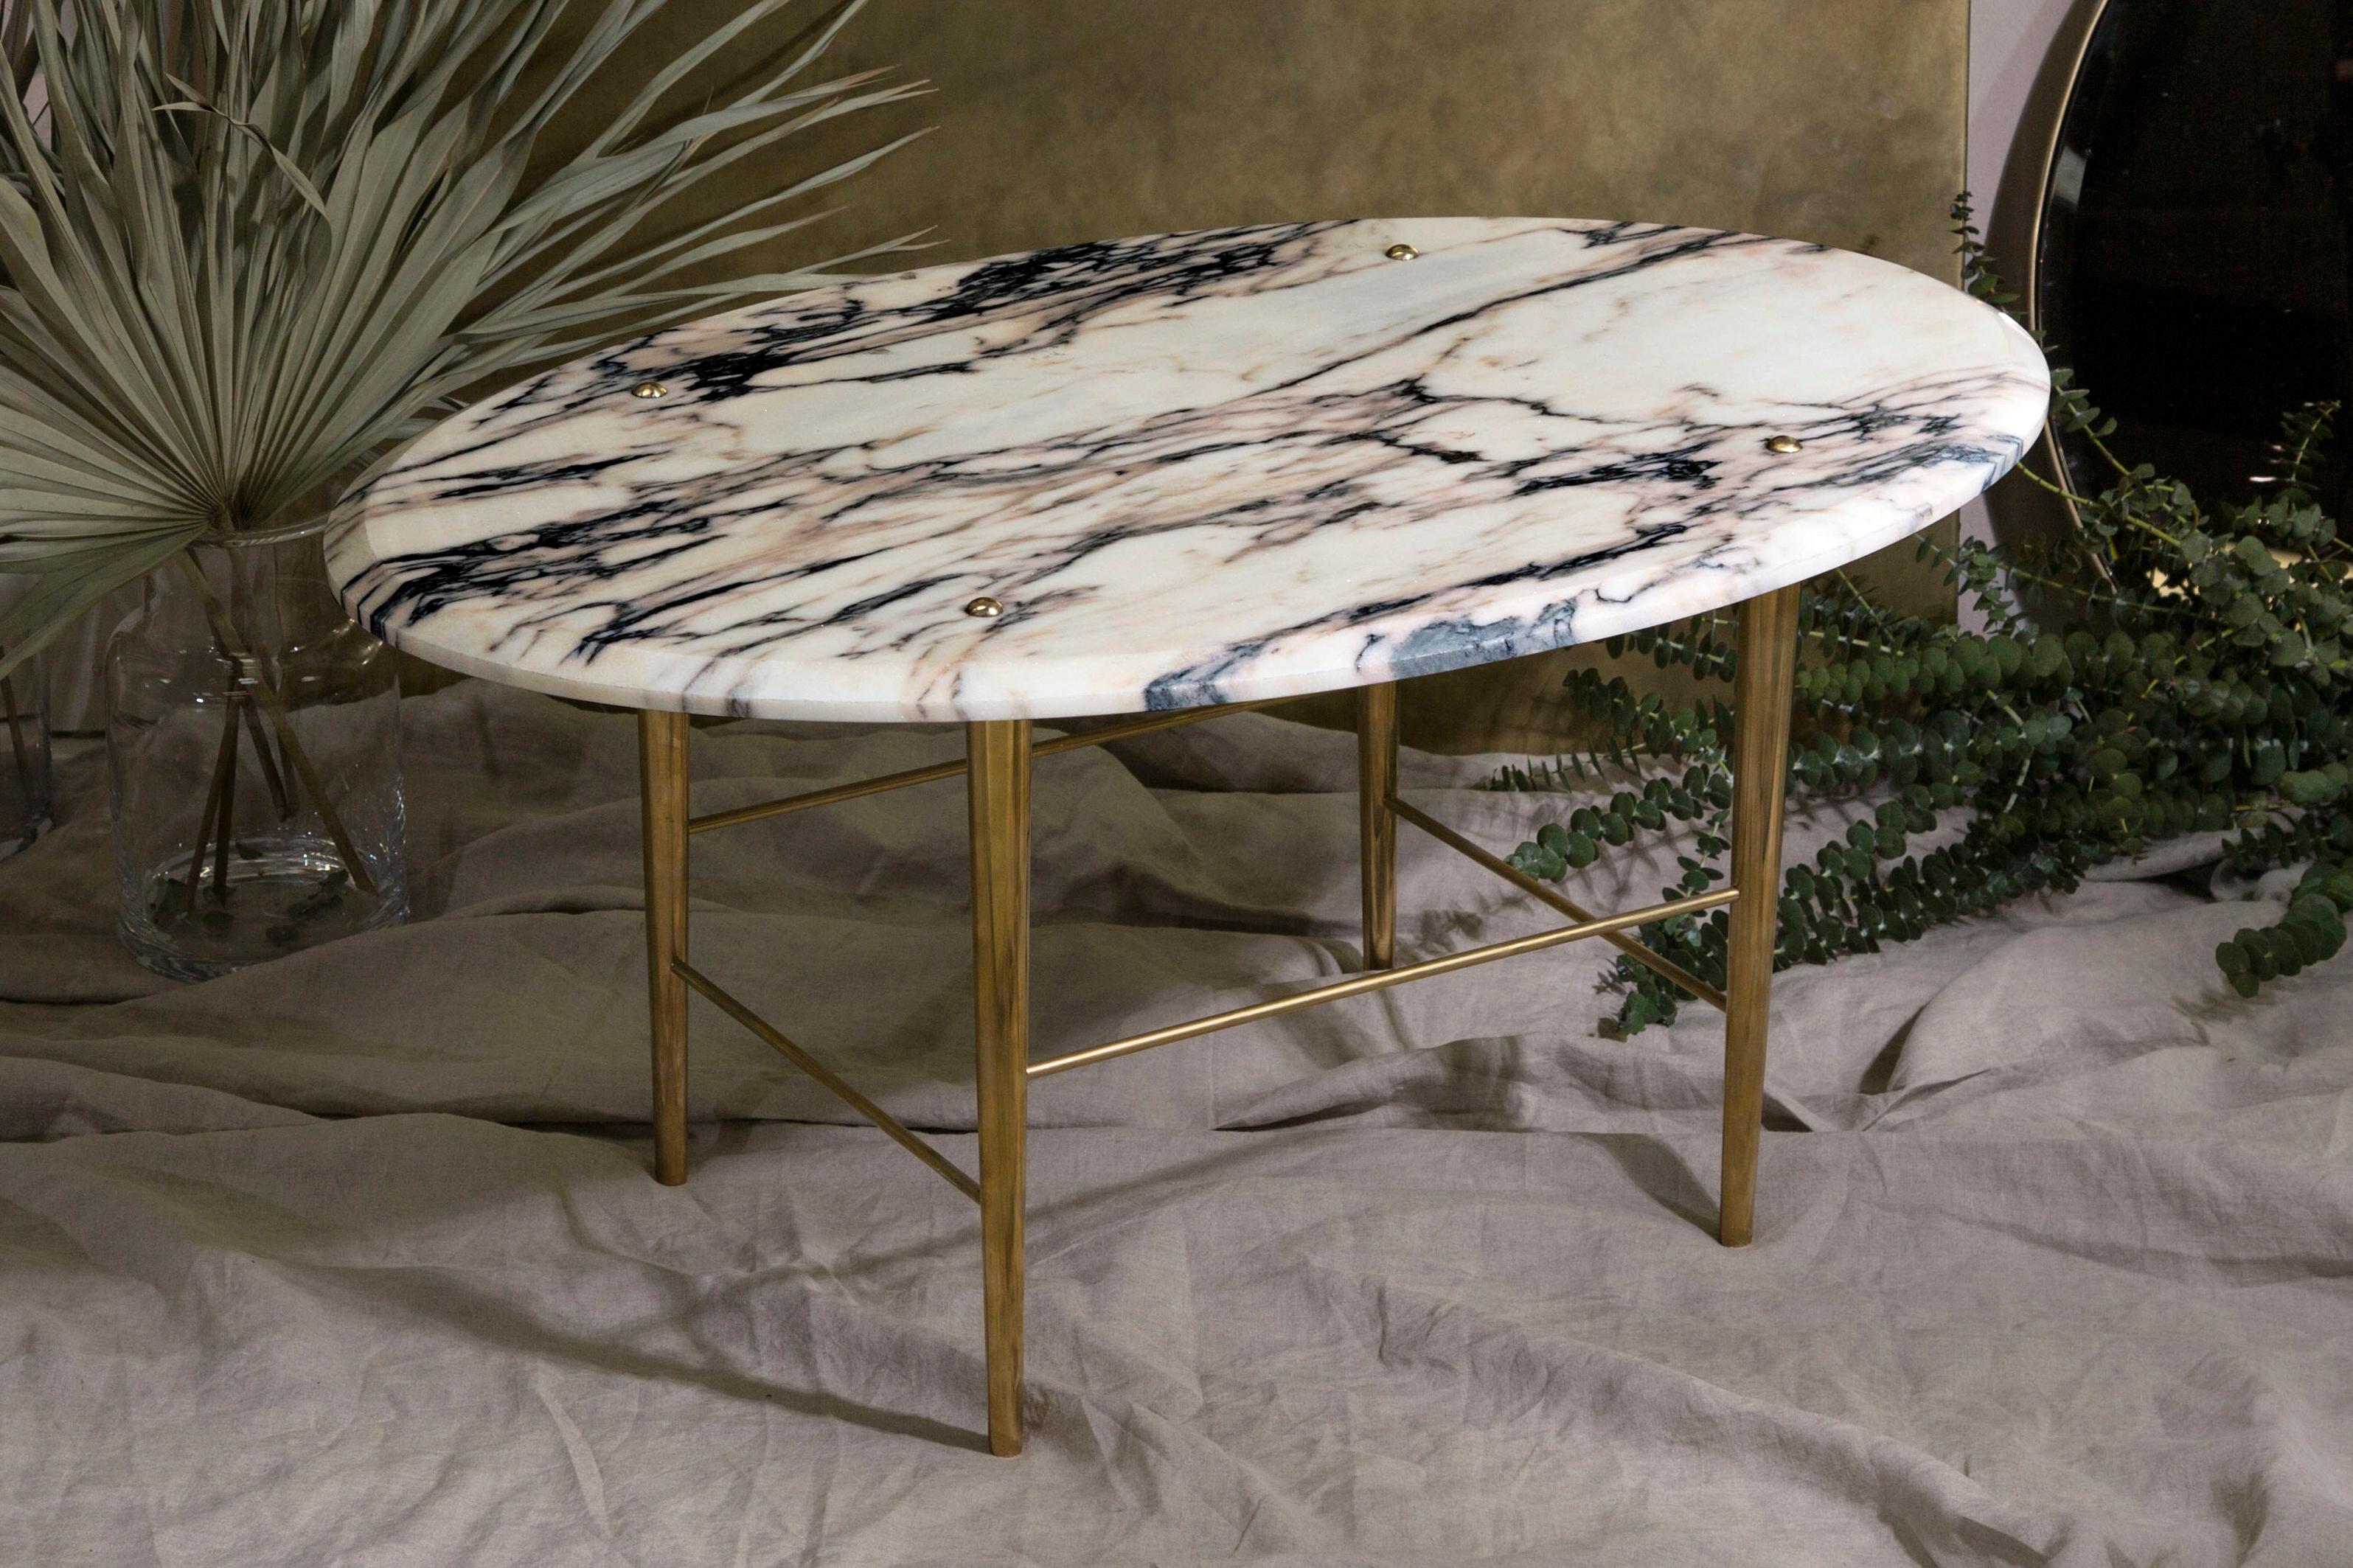 Medium Vulcanatta Stud coffee table by Lind + Almond
Handcrafted
Dimensions: 100 L x 64 W x 40 H
Materials: marble, brass.

A coffee table in Portuguese marble and polished brass. Hand crafted to order in Northern England. Bespoke sizes and